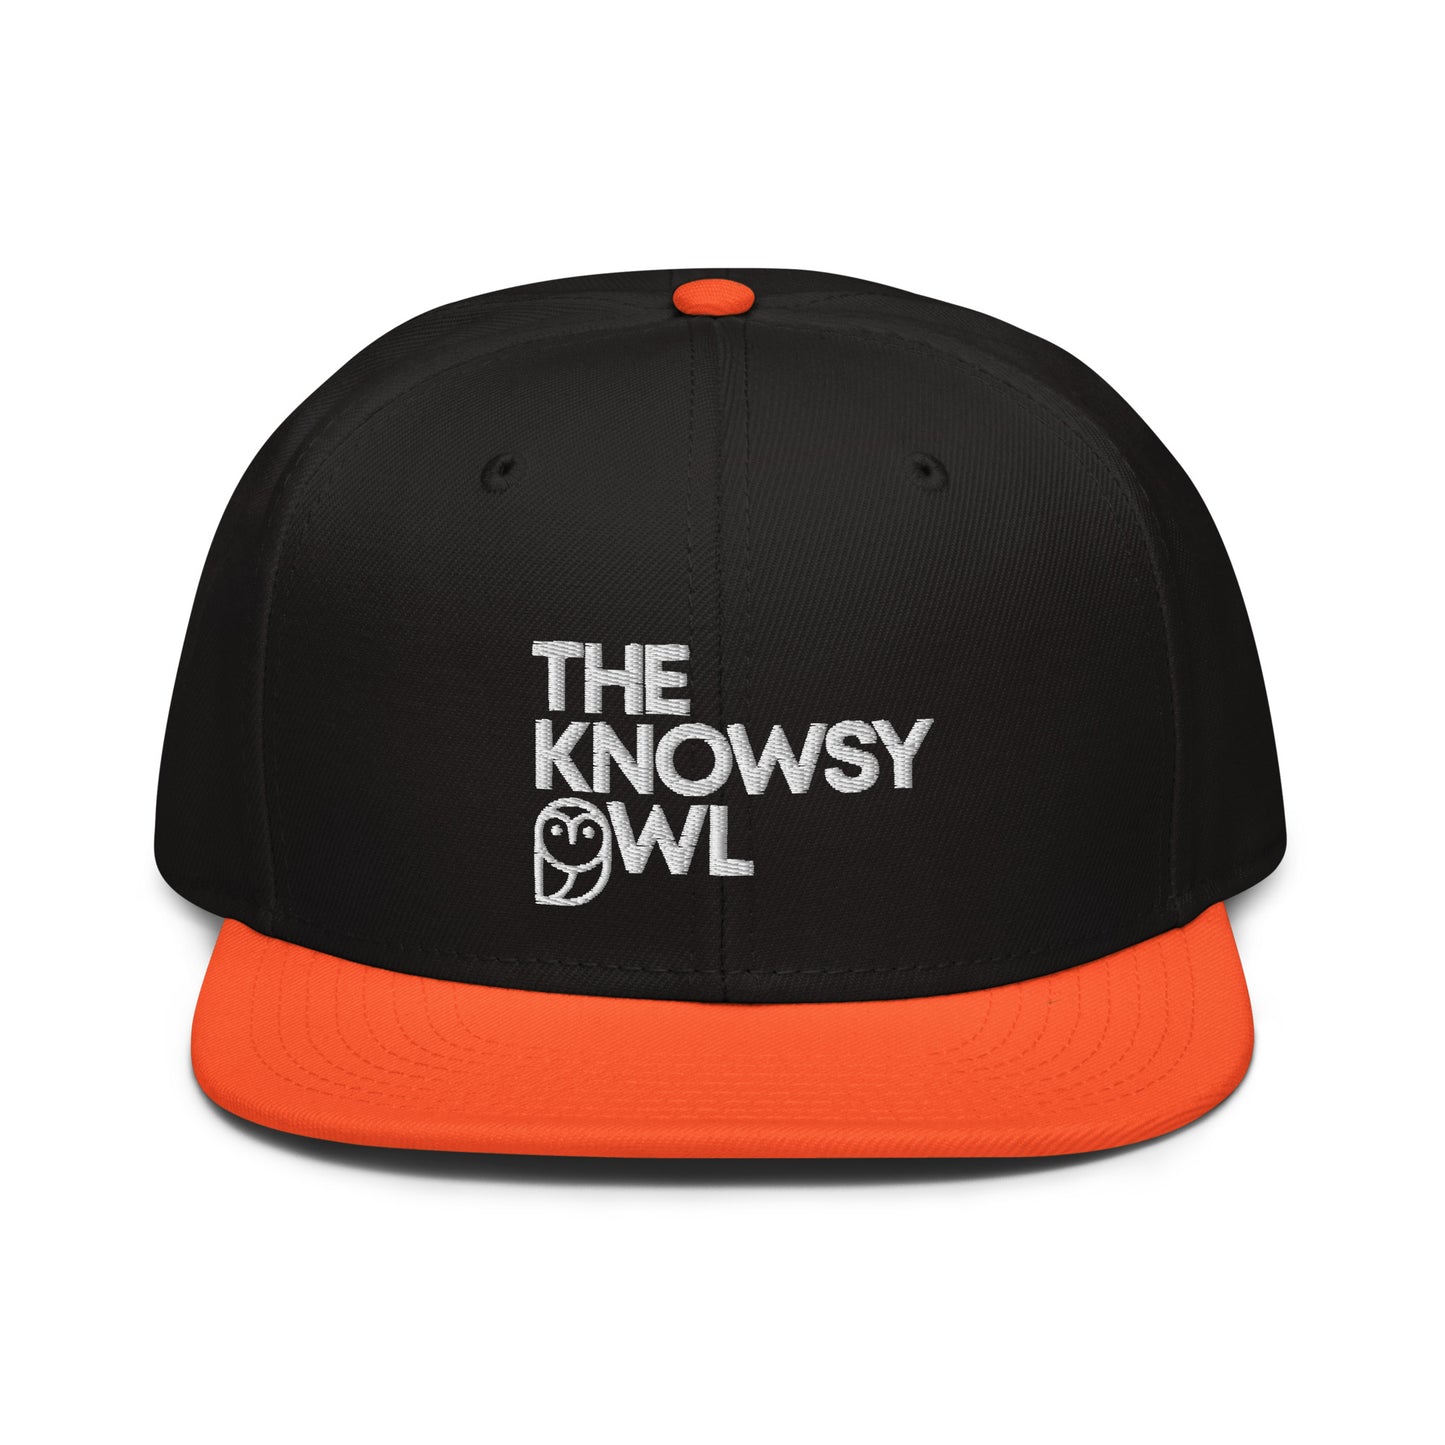 The Knowsy Owl Snapback Hat